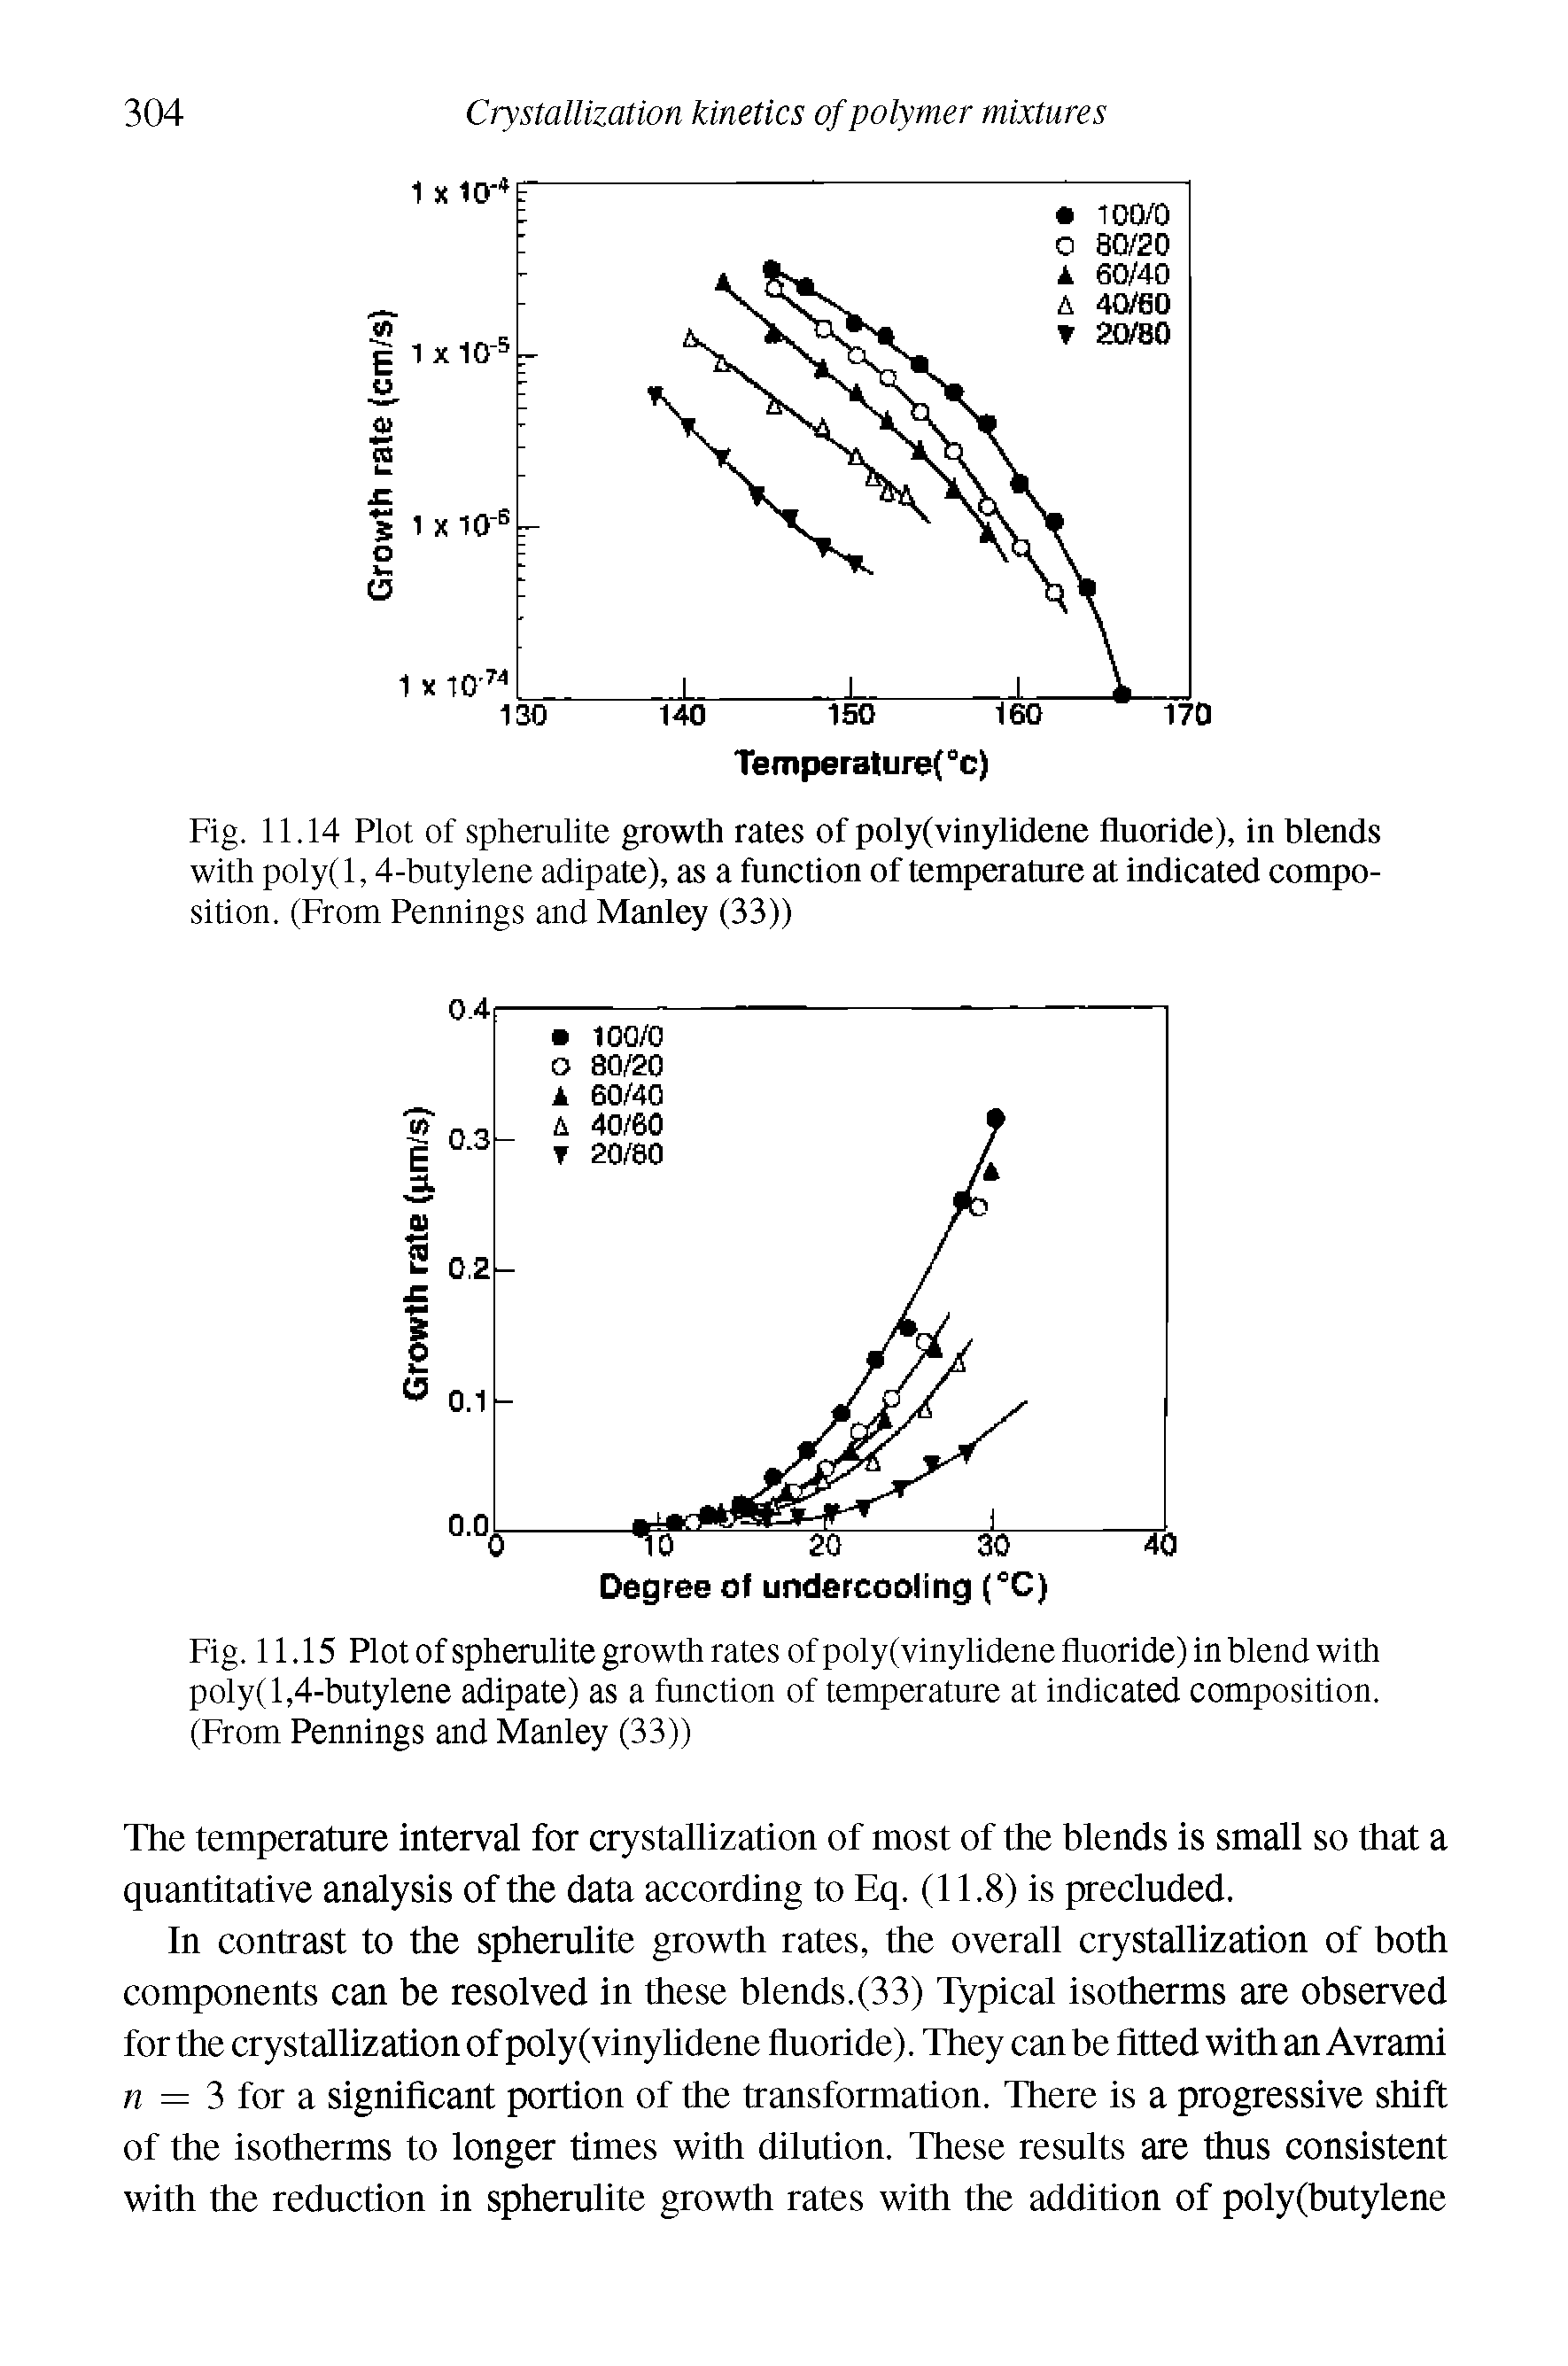 Fig. 11.15 Plot of spherulite growth rates of poly(vinylidene fluoride) in blend with poly( 1,4-butylene adipate) as a function of temperature at indicated composition. (From Pennings and Manley (33))...